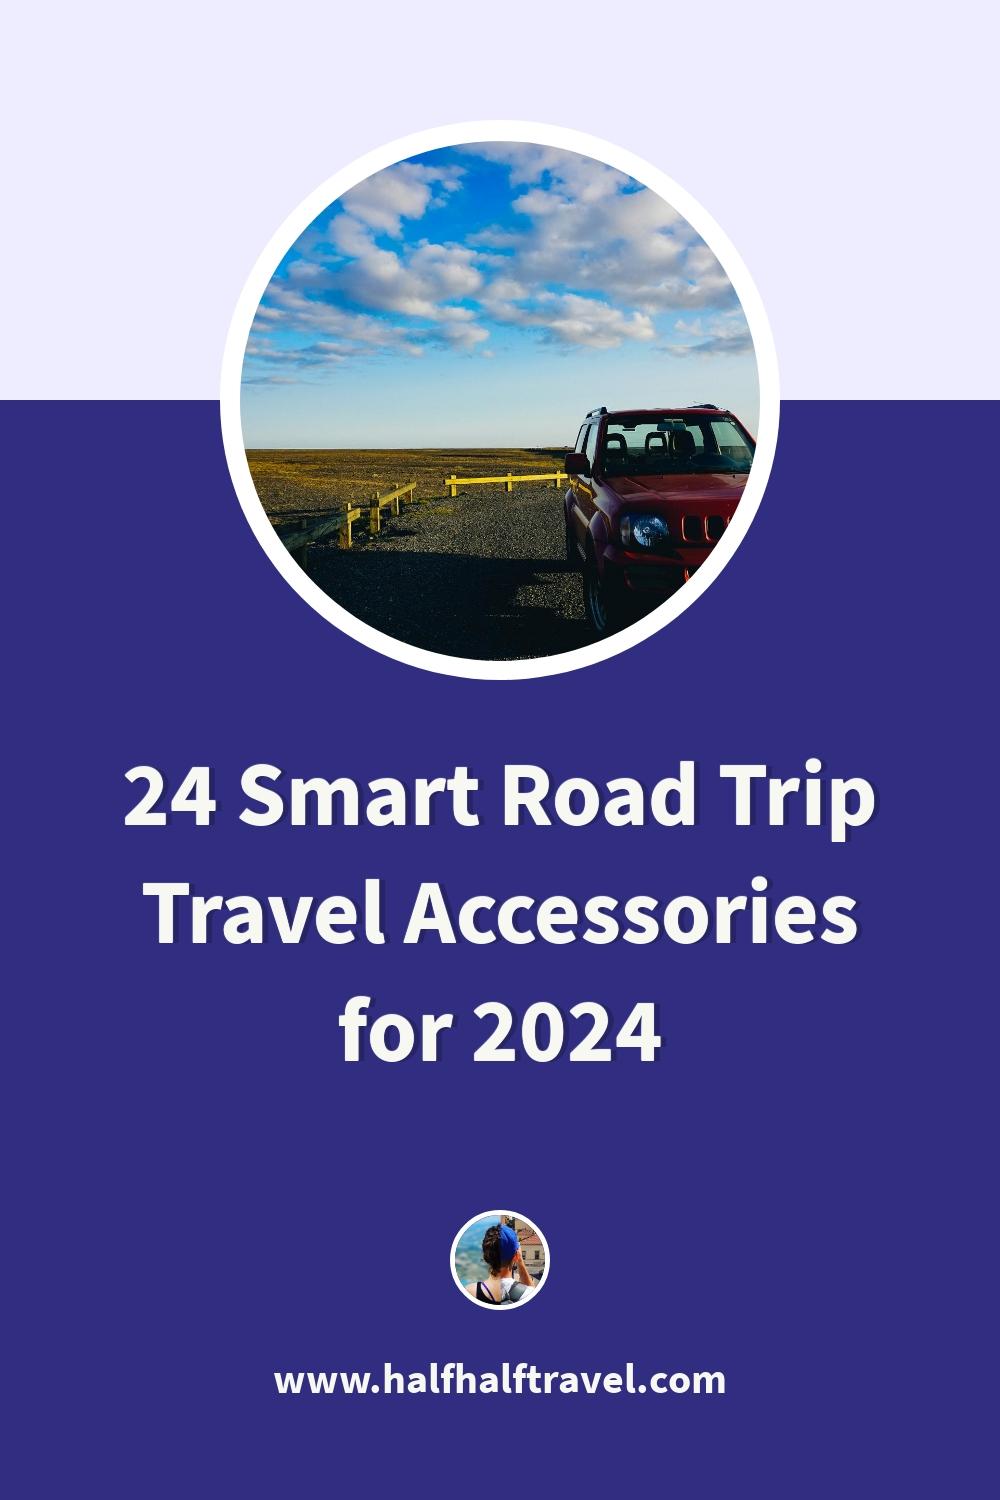 Pinterest image from the '24 Smart Road Trip Travel Accessories for 2024' article on Half Half Travel